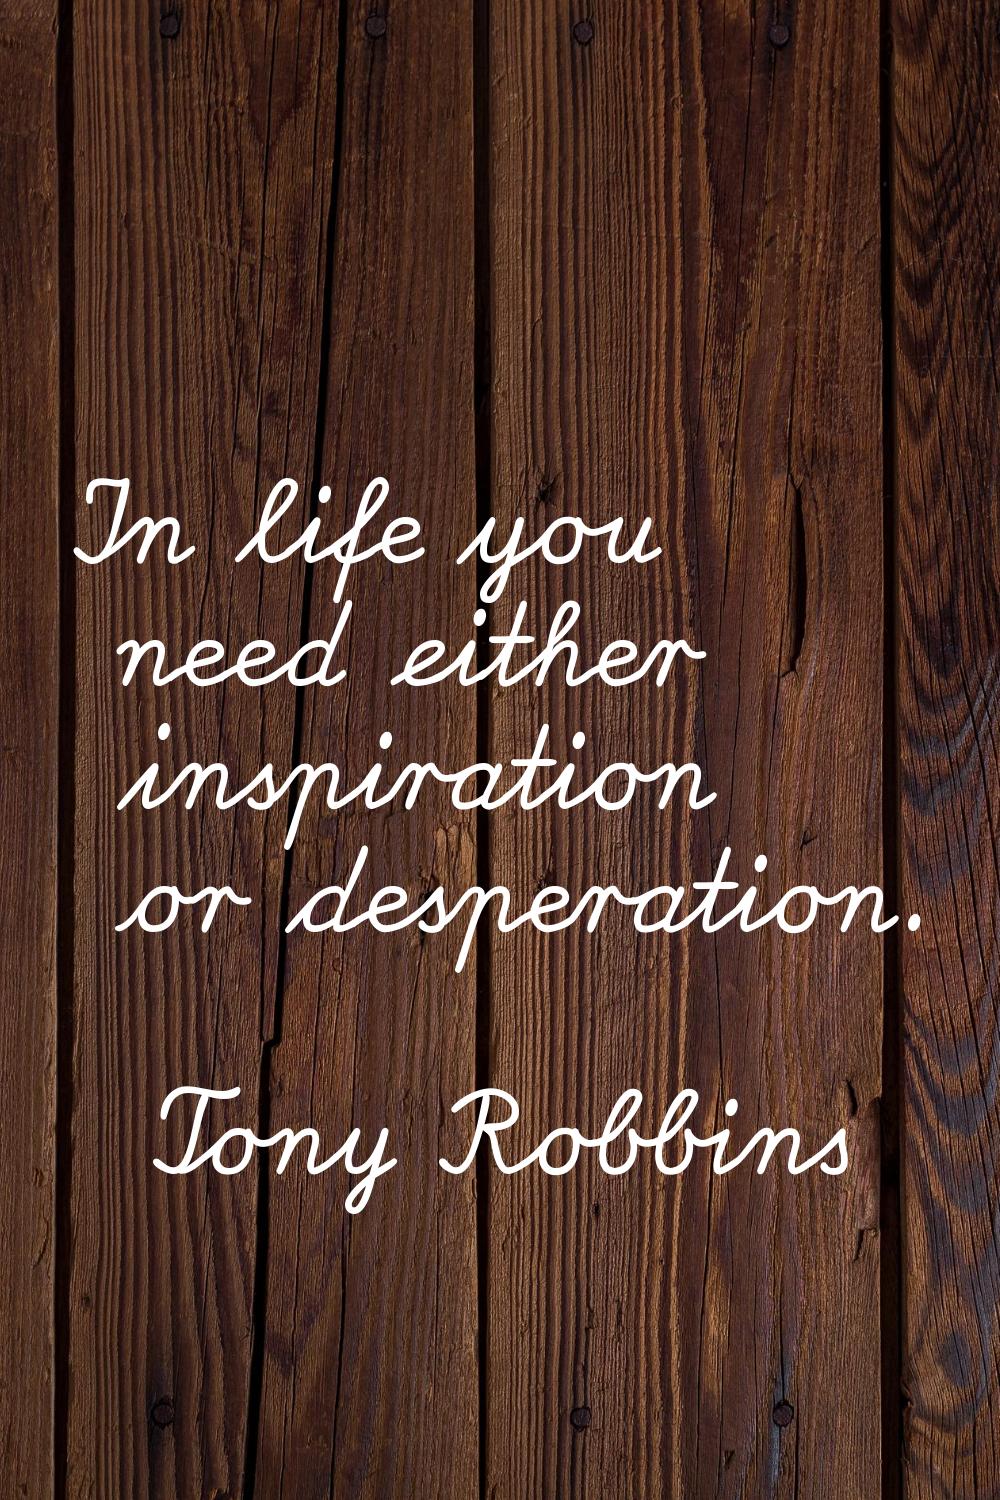 In life you need either inspiration or desperation.